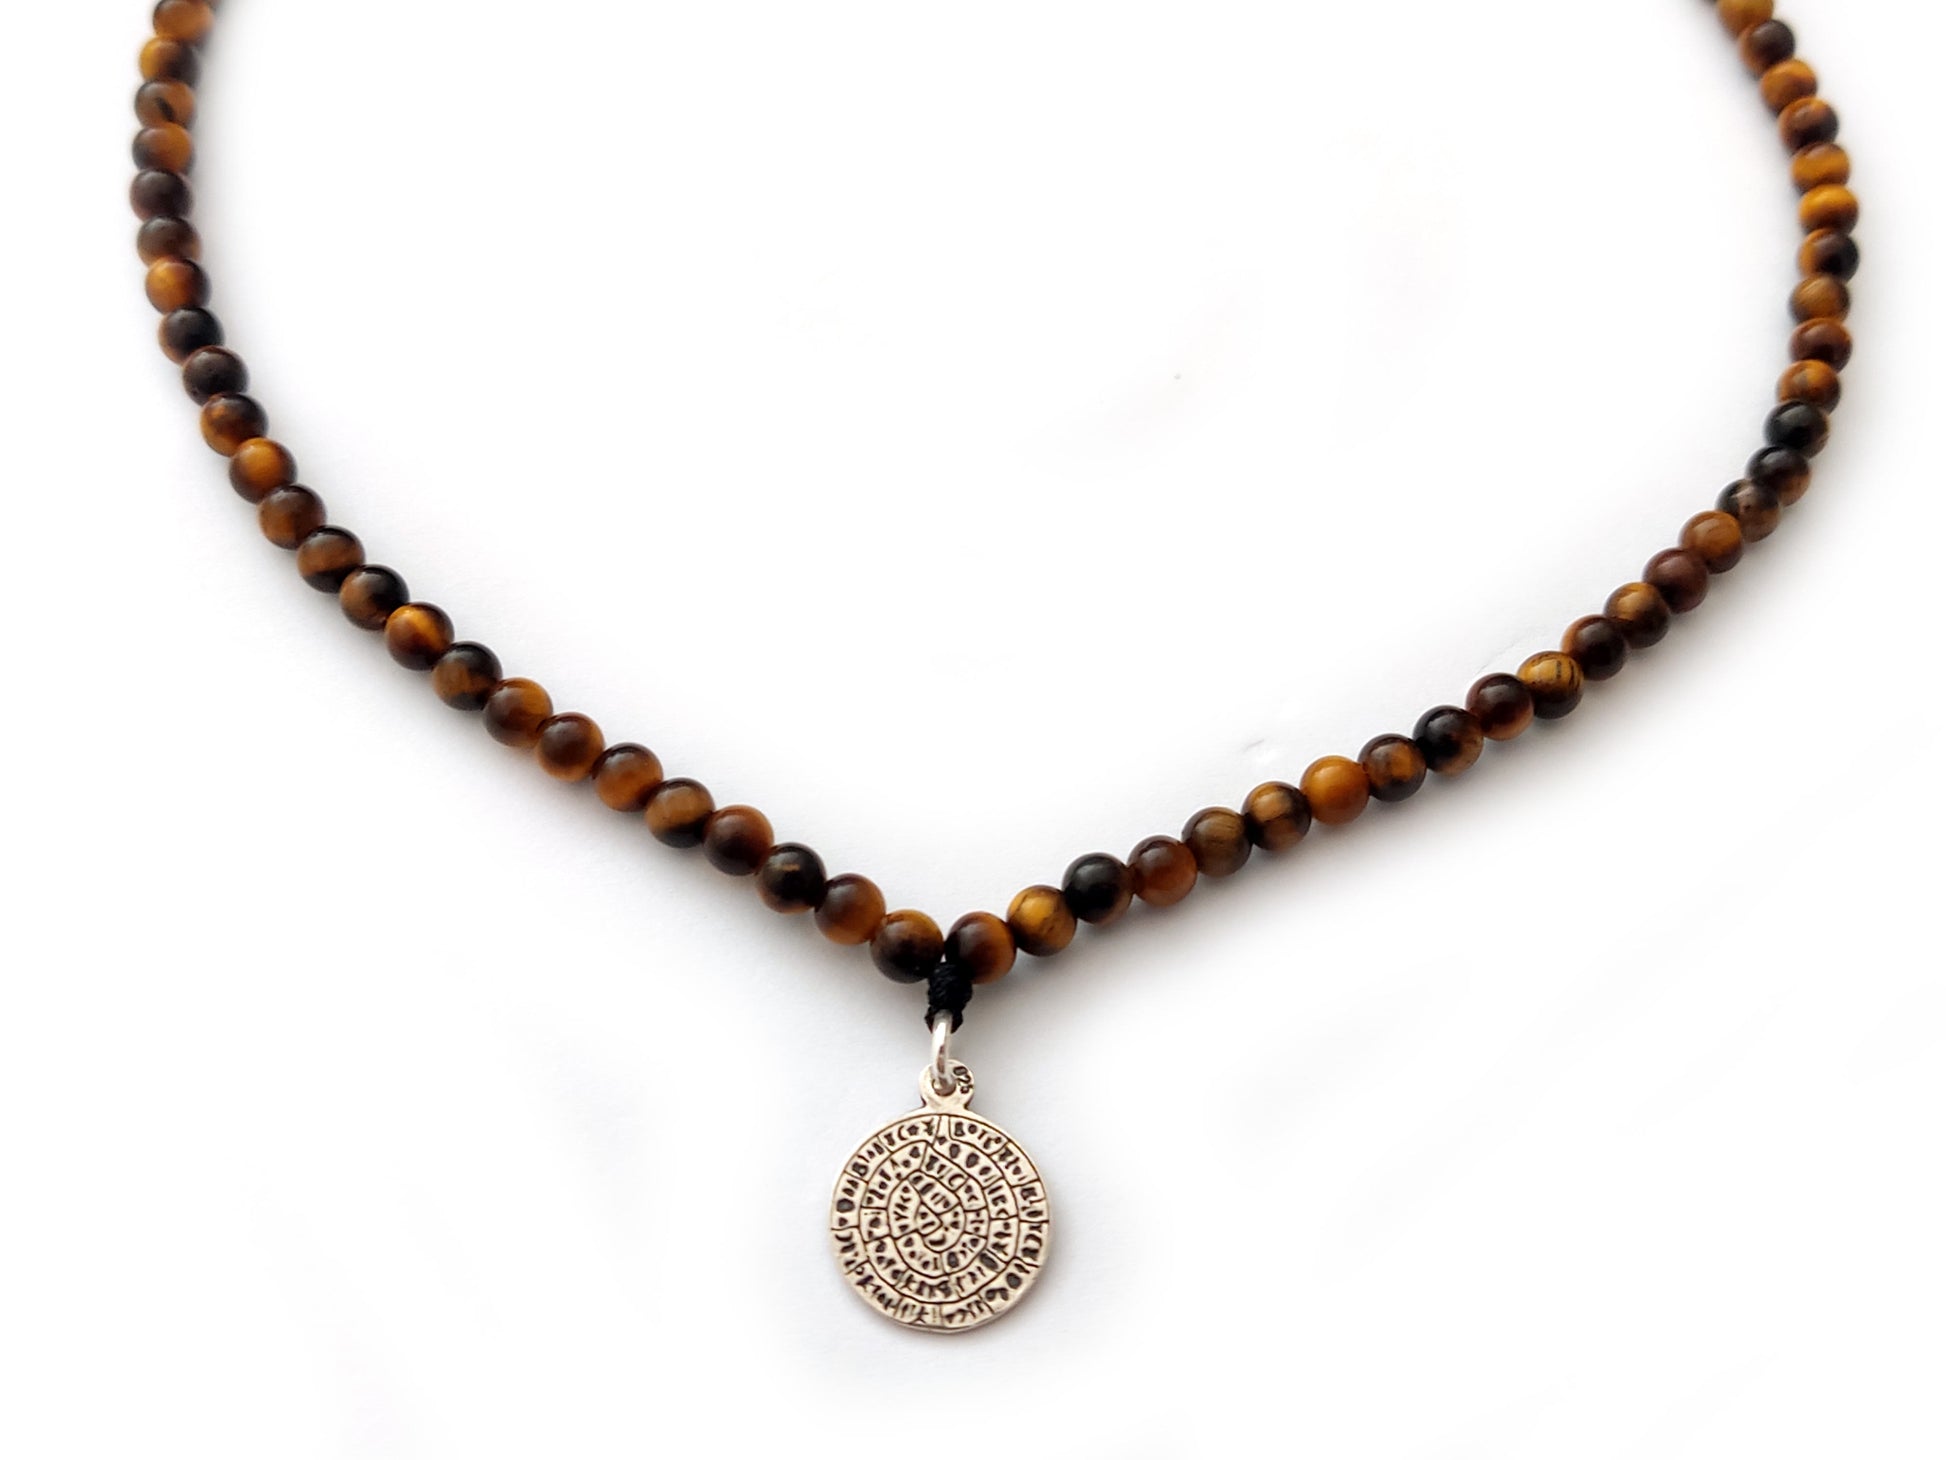 Phaistos Disc silver pendant measuring 13mm with tiger's eye stones 4mm